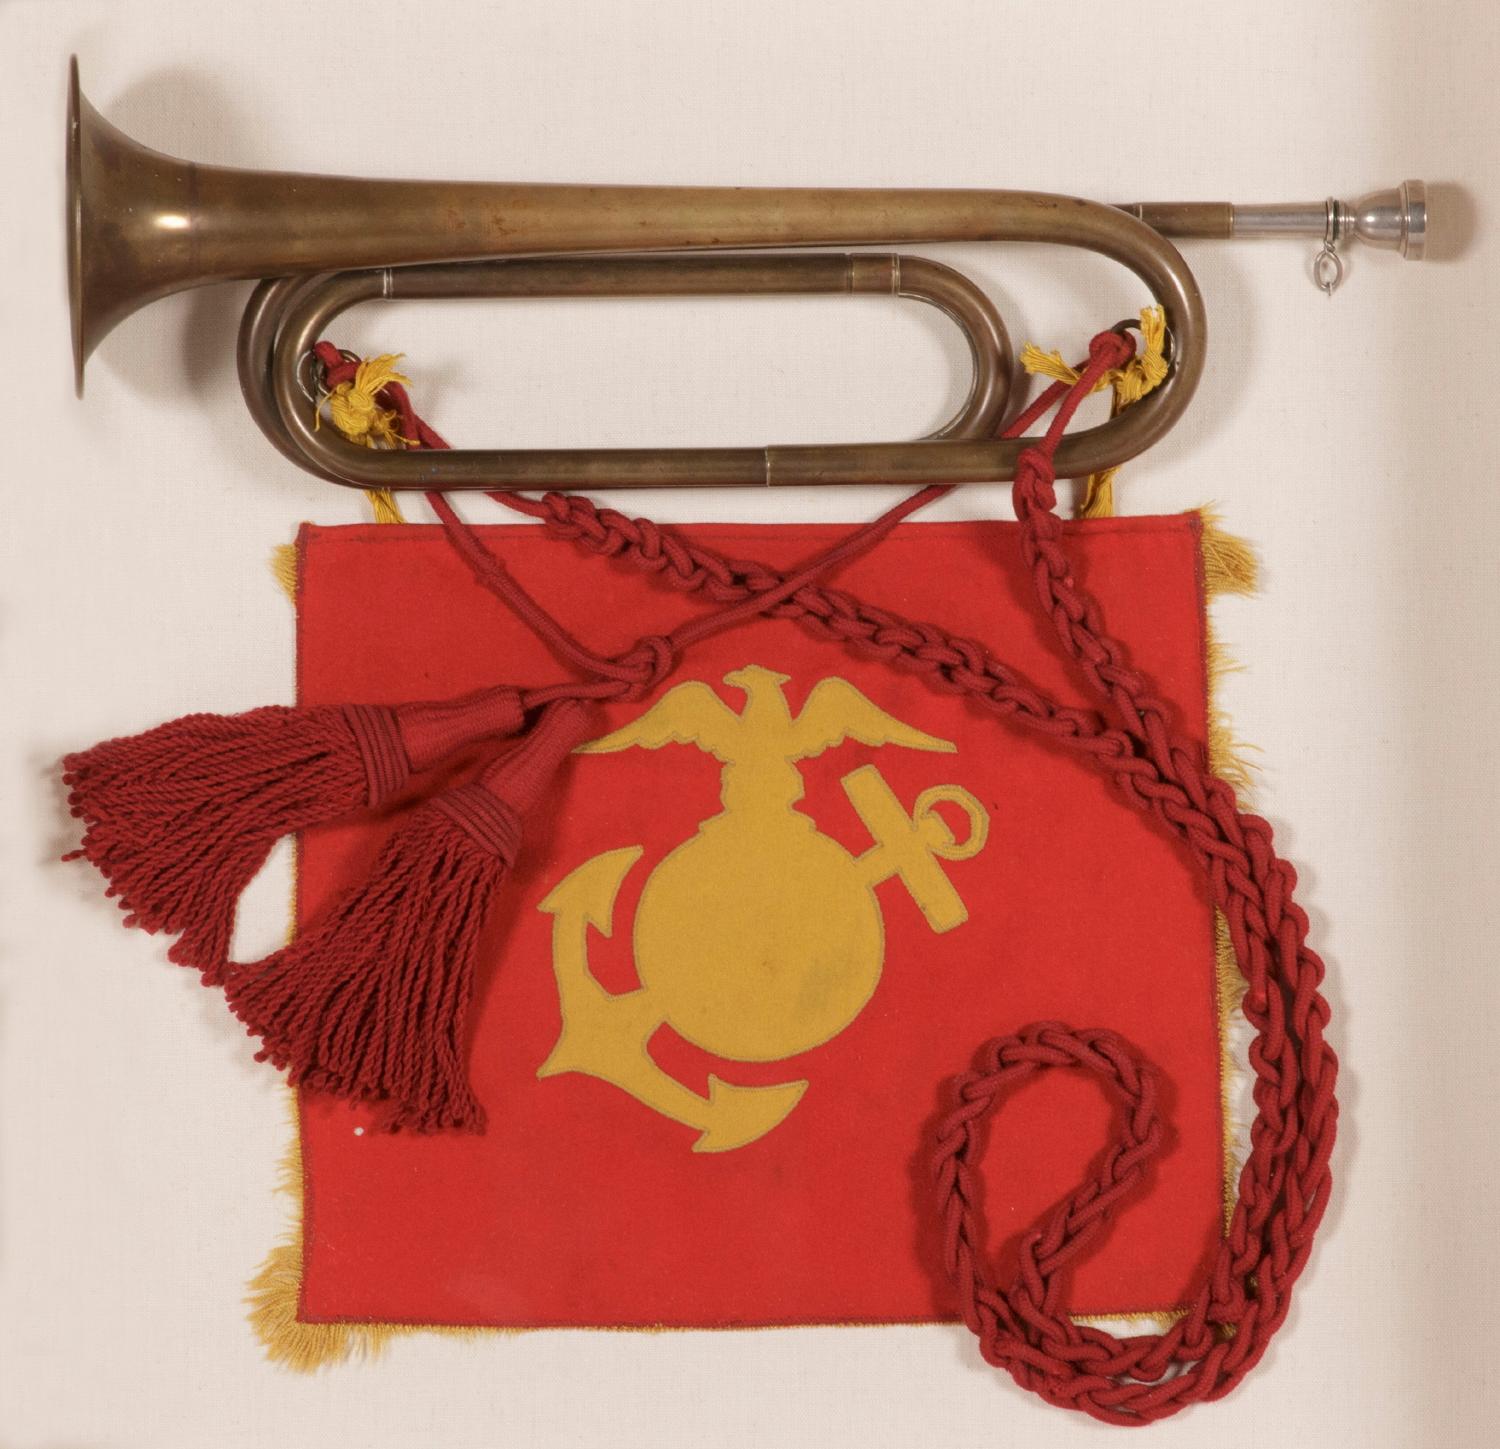 COMBINATION MARINE CORPS BUGLE, SASH, AND BANNER, WWII ERA (1941-1945), BUGLECRAFT, BROOKLYN, NEW YORK 

WWII era (U.S. involvement 1941-45) Marine Corps bugle, woolen sash, and a fringed, felted wool banner, specifically made to match and affix